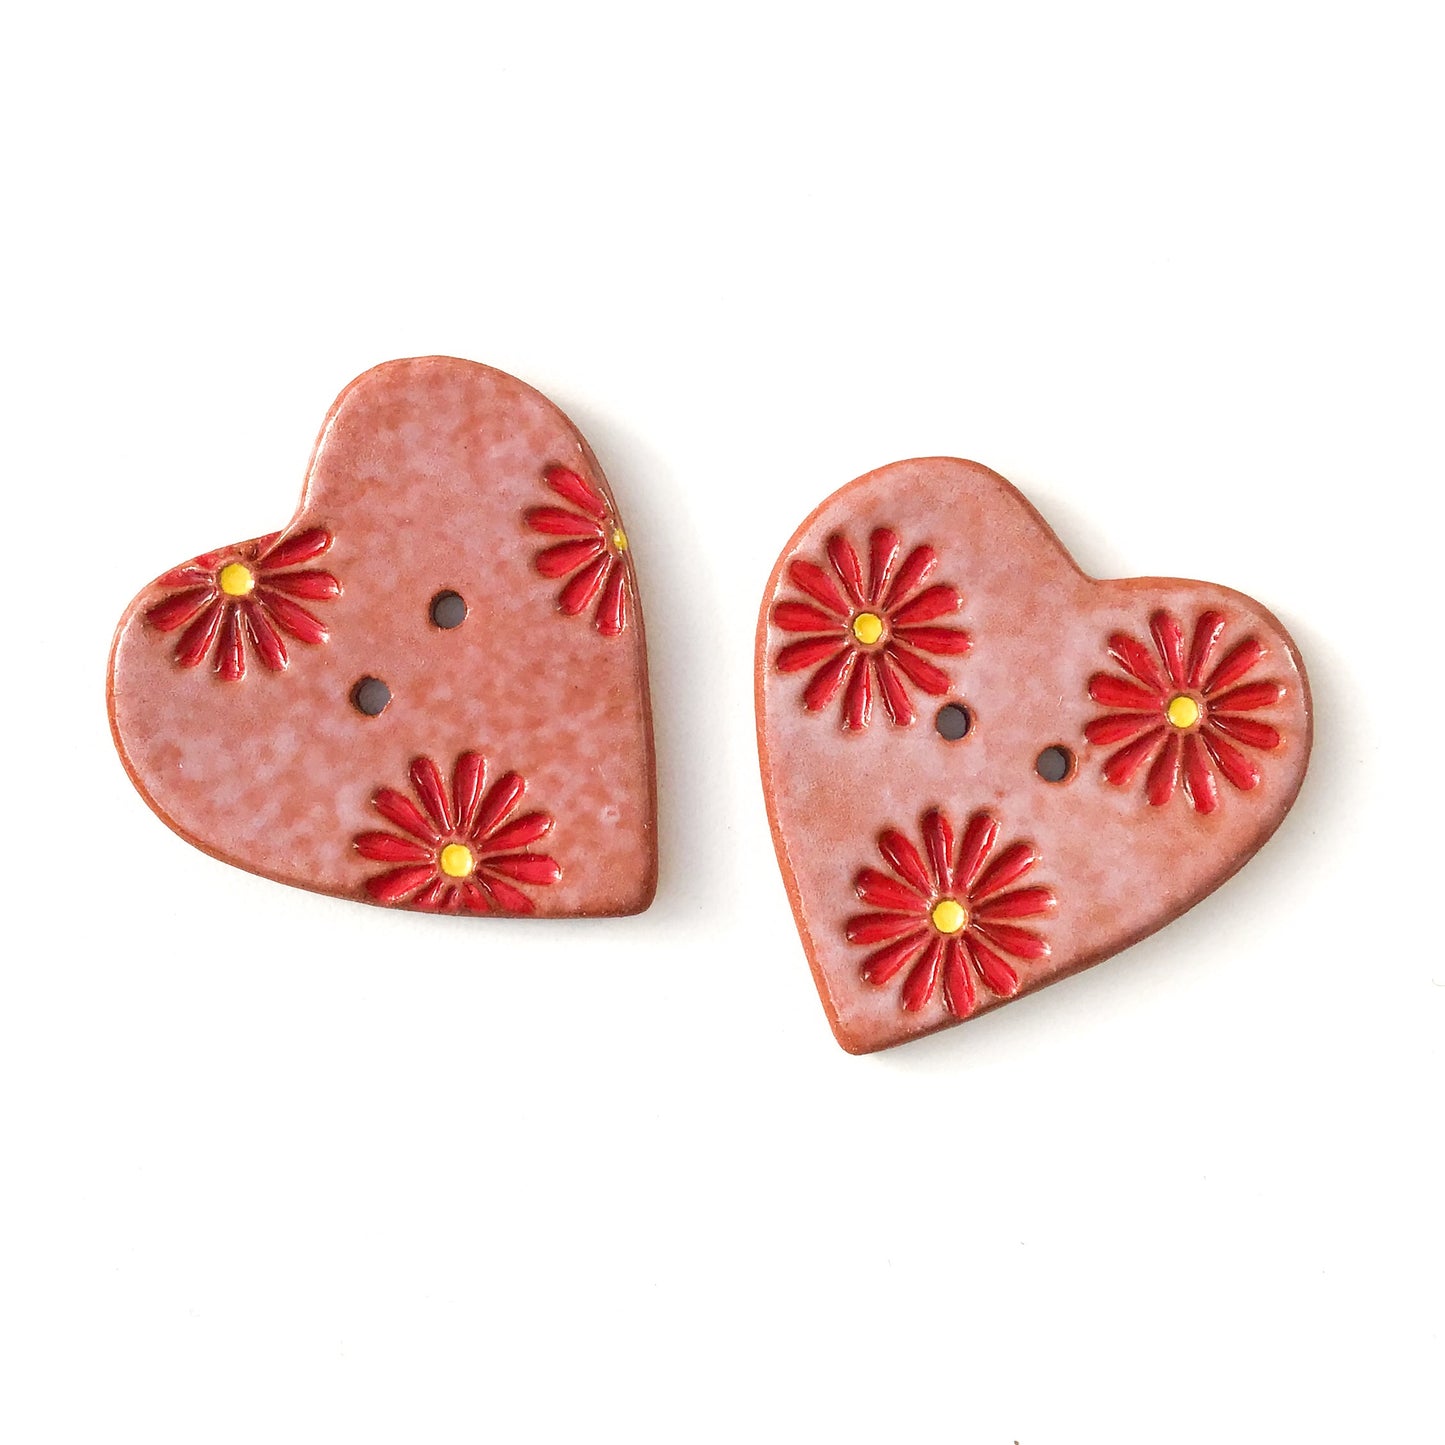 Decorative Heart Buttons - Ceramic Heart Button - Red Daisies - 1 3/8"